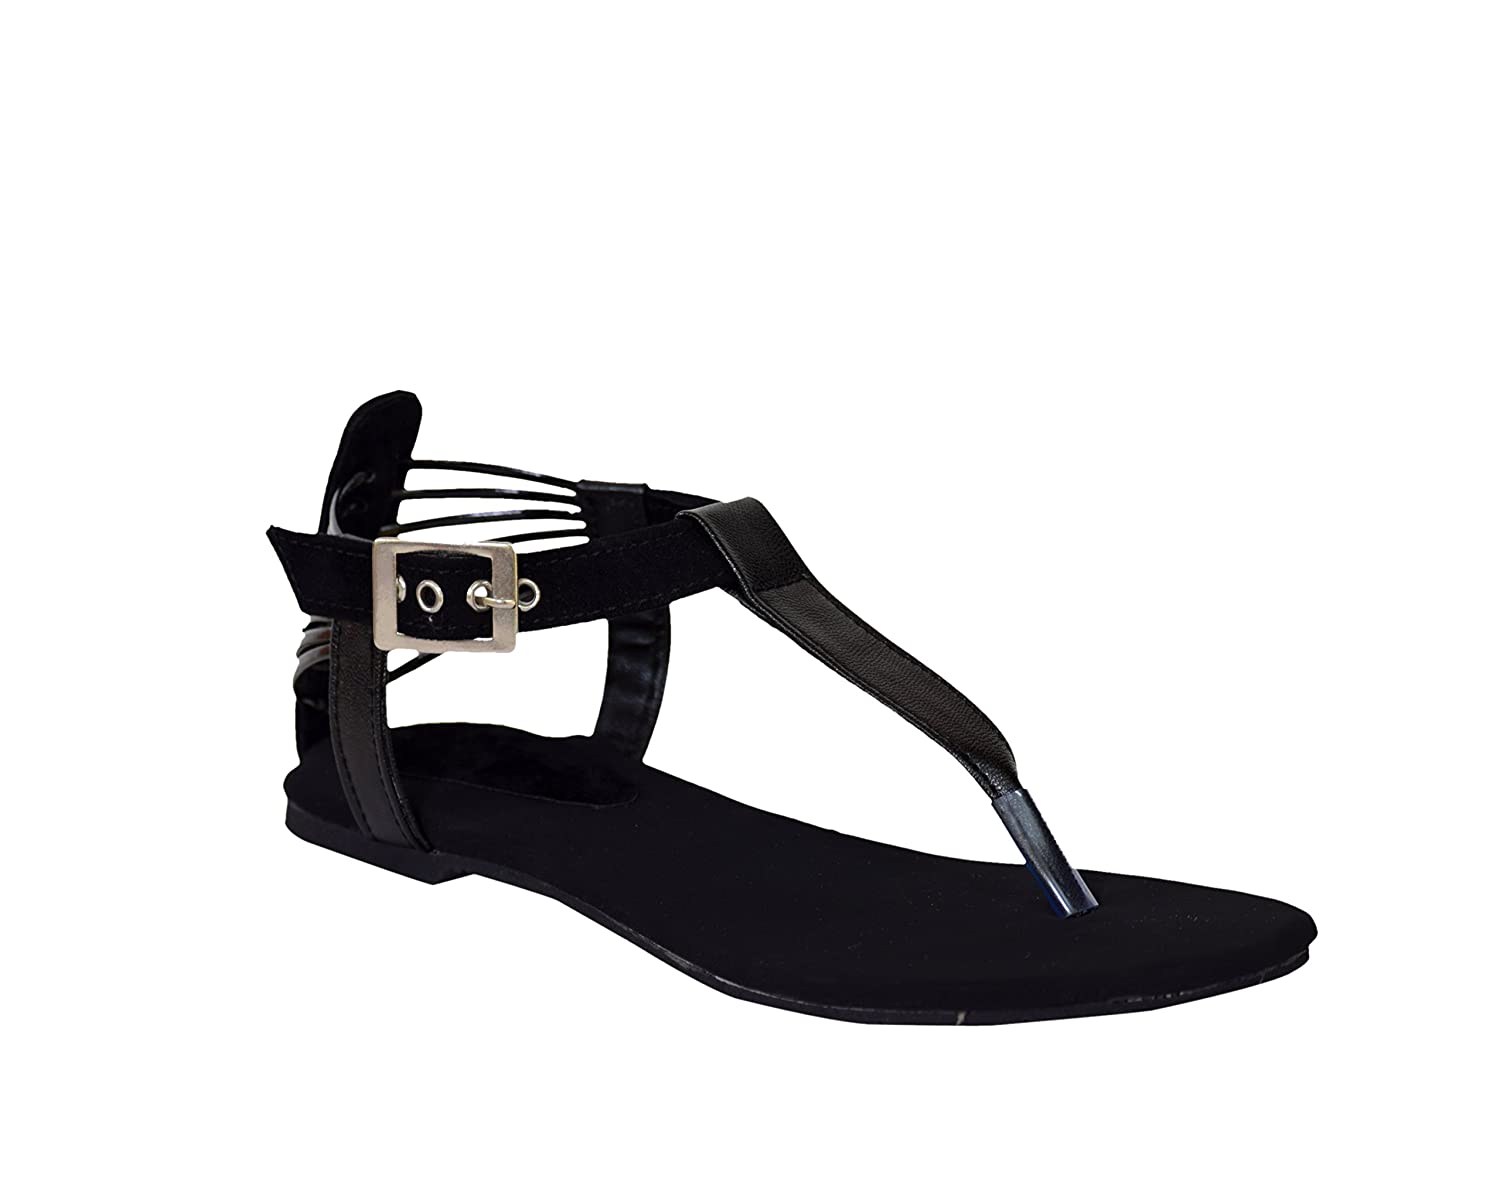 Stepee Sandal for Women Flat Casual Chappal for Girls and Womens Price in India